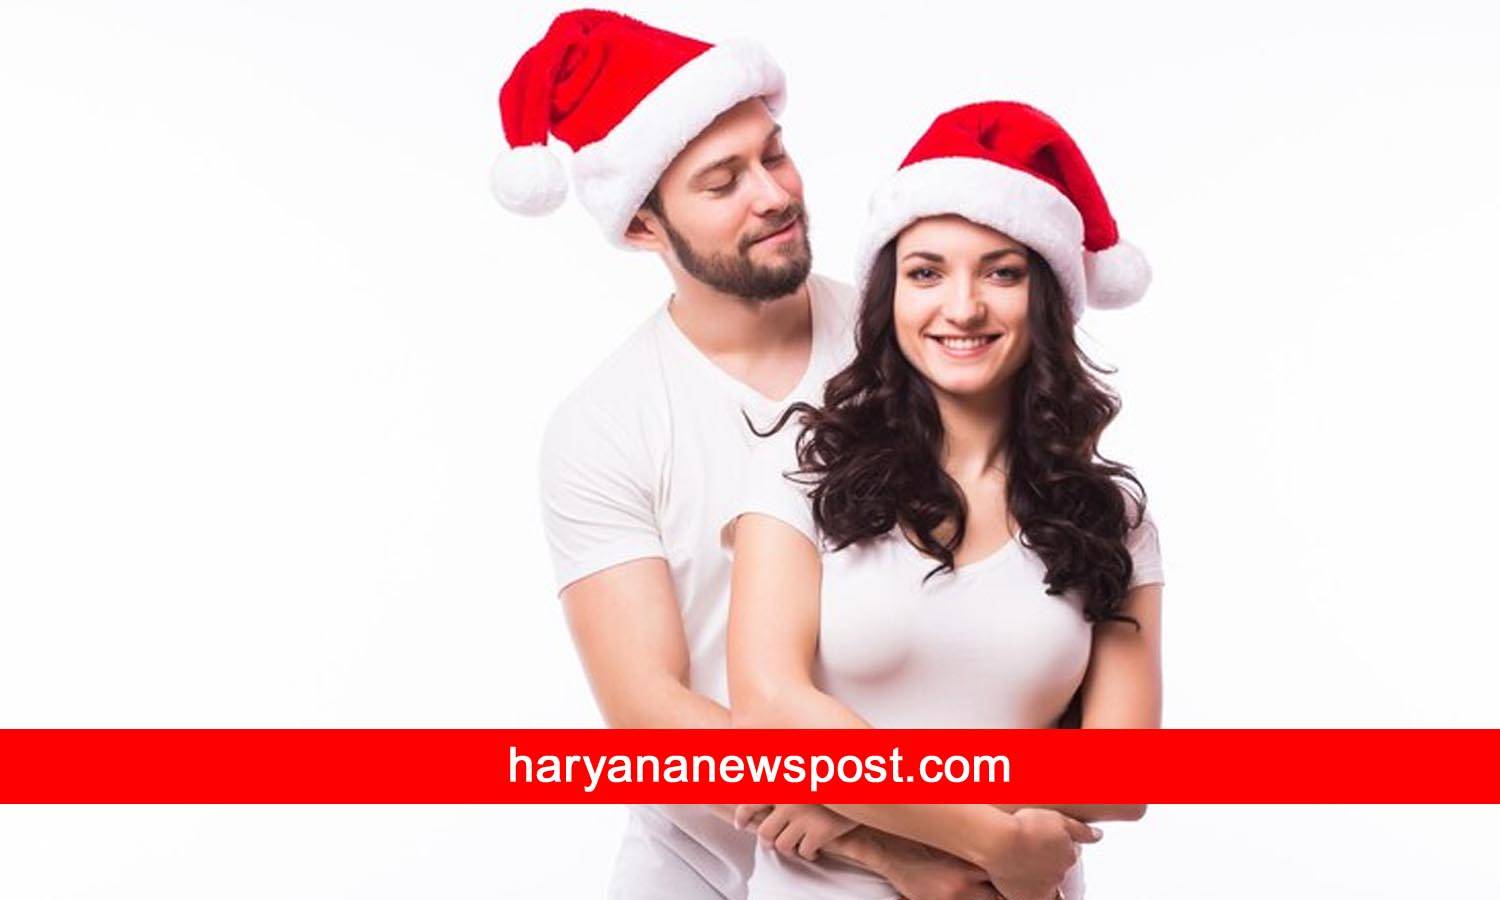 Funny Christmas image Messages for Husband